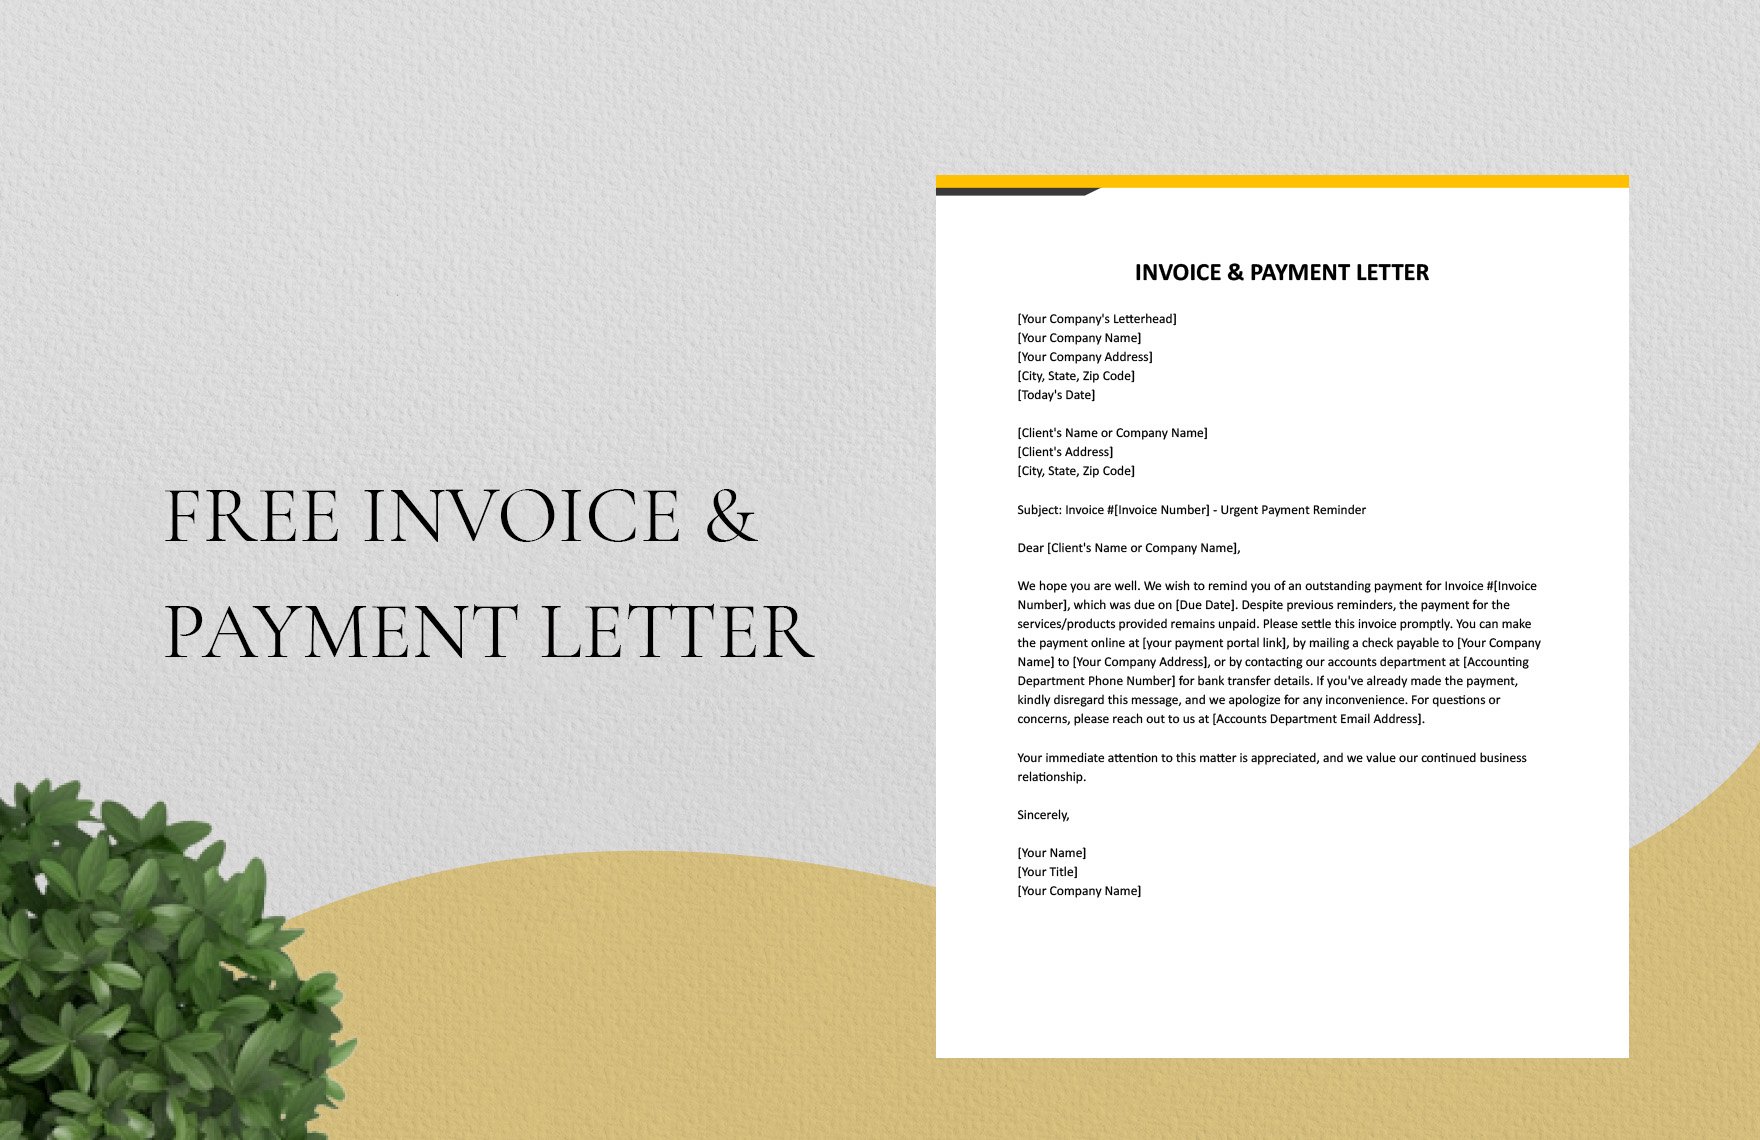 Invoice & Payment Letter in Word, Google Docs